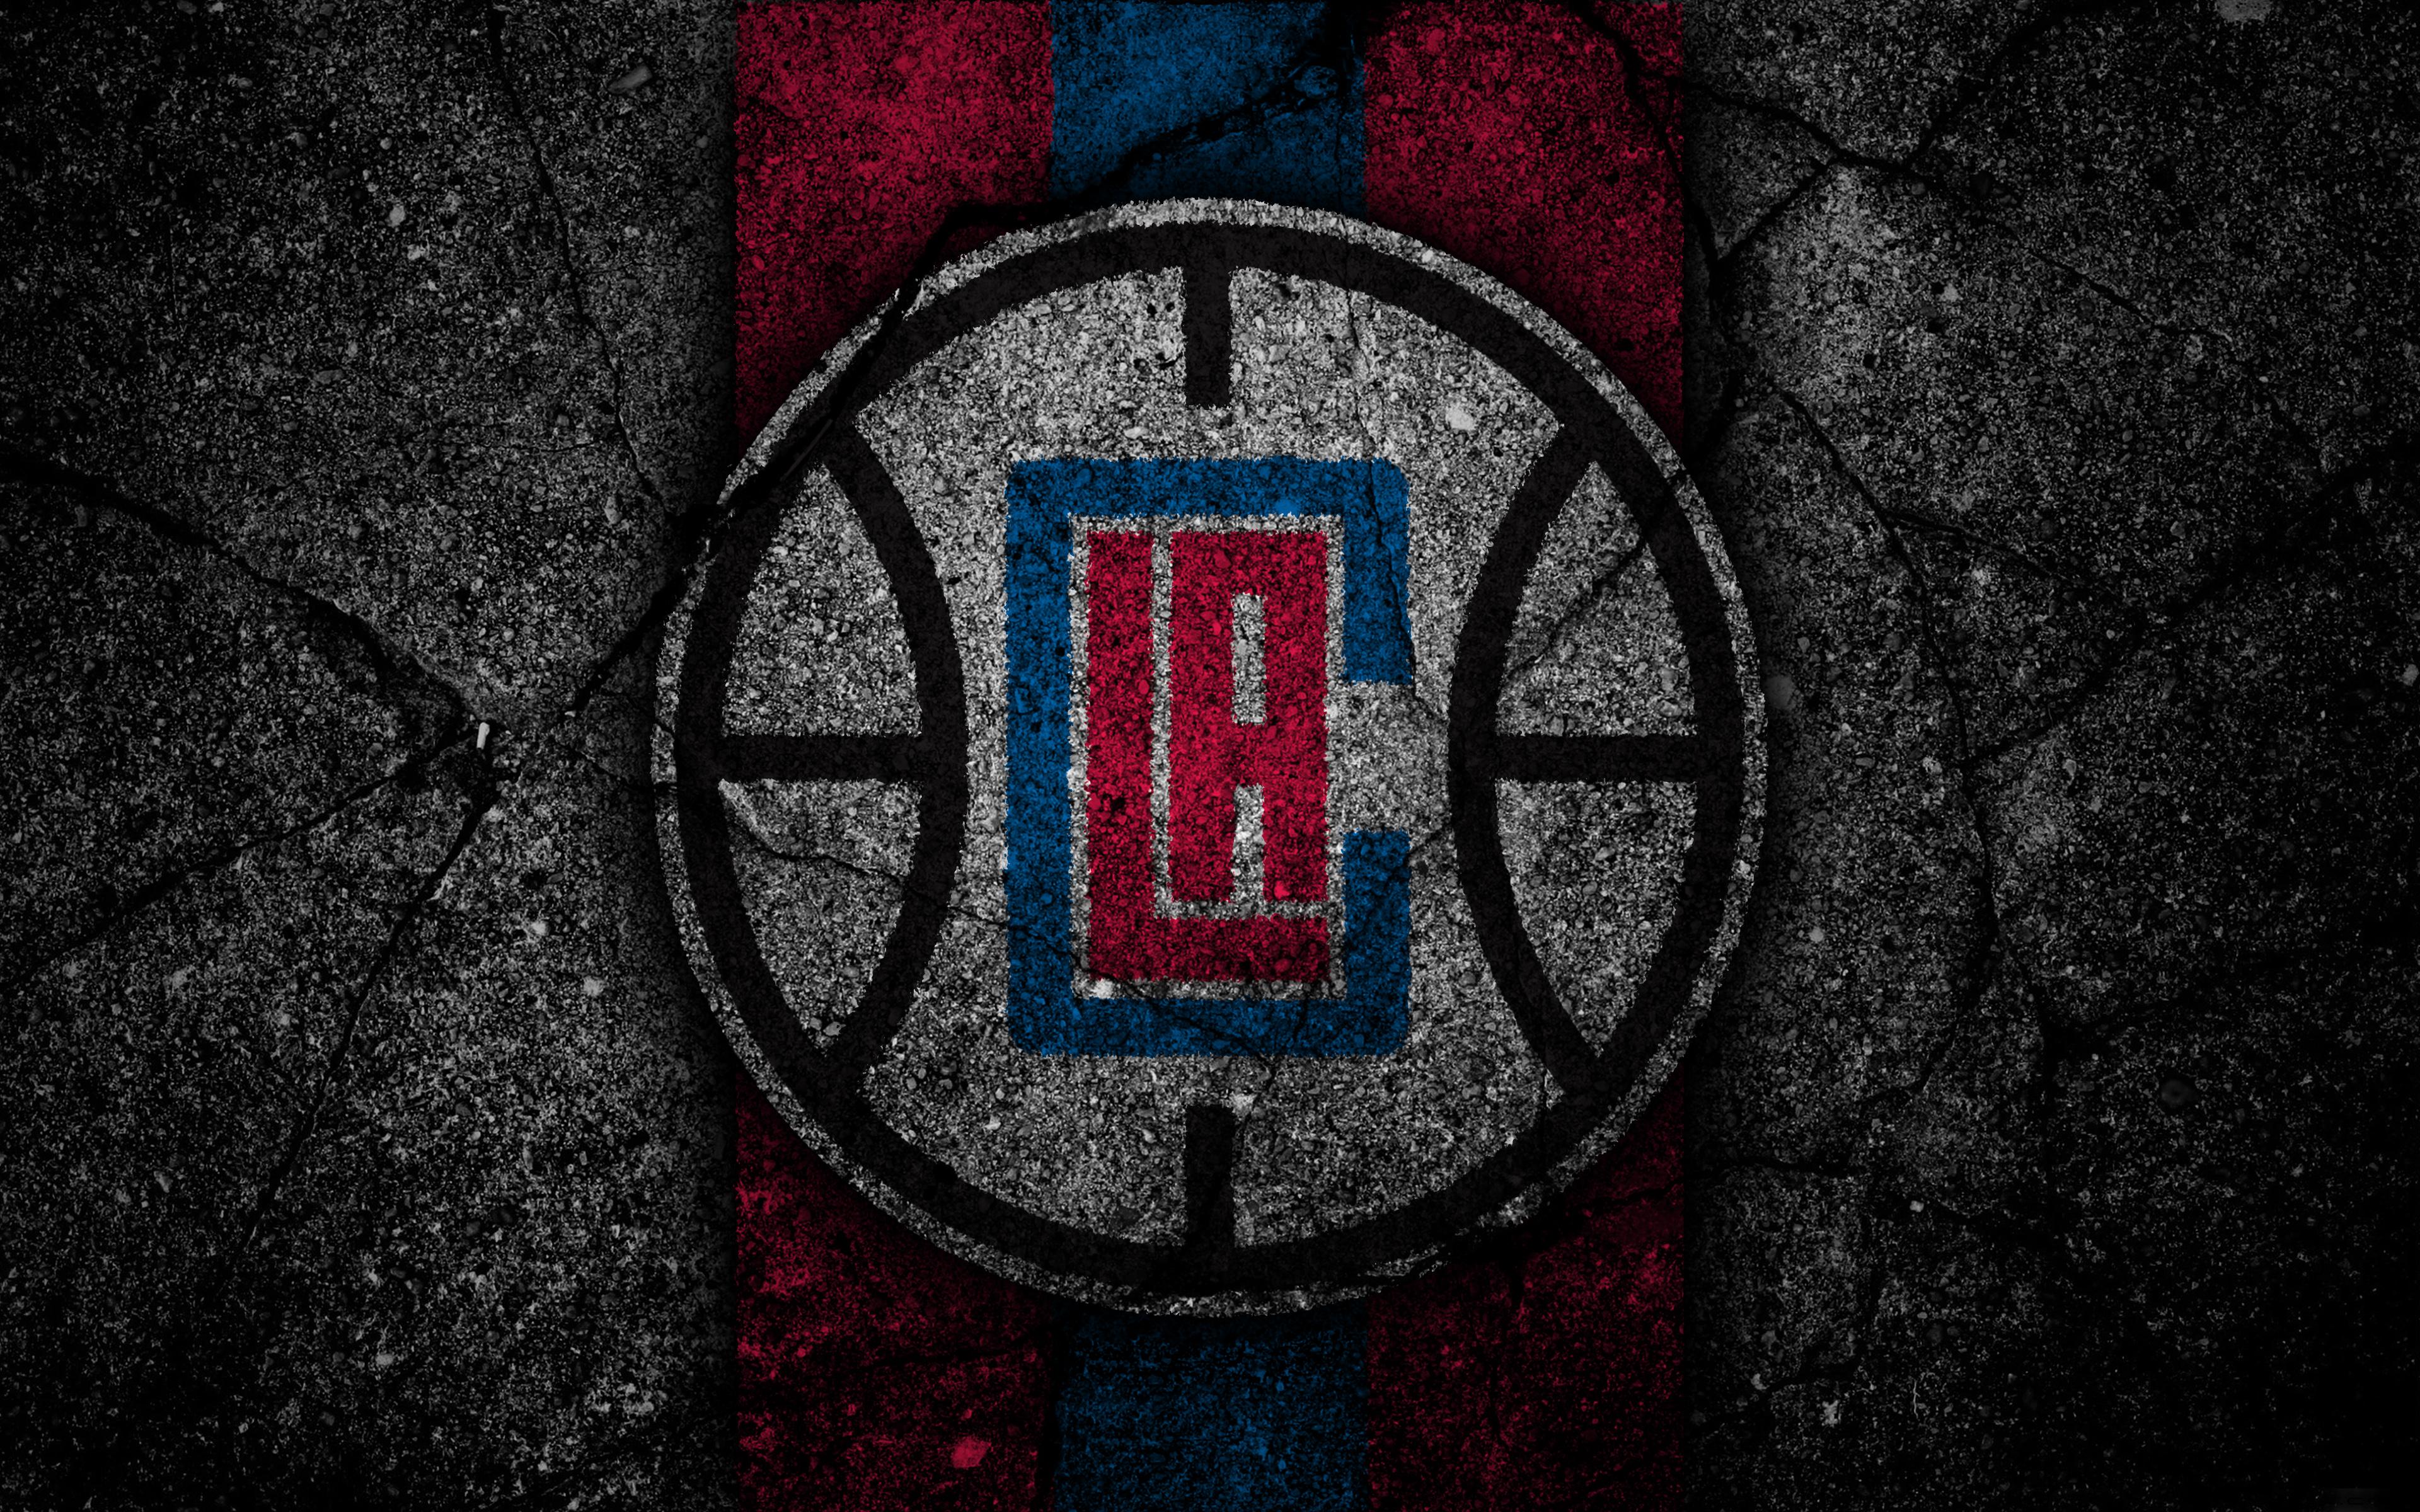 Los Angeles Clippers Logo 4k Ultra HD Wallpaper. Background